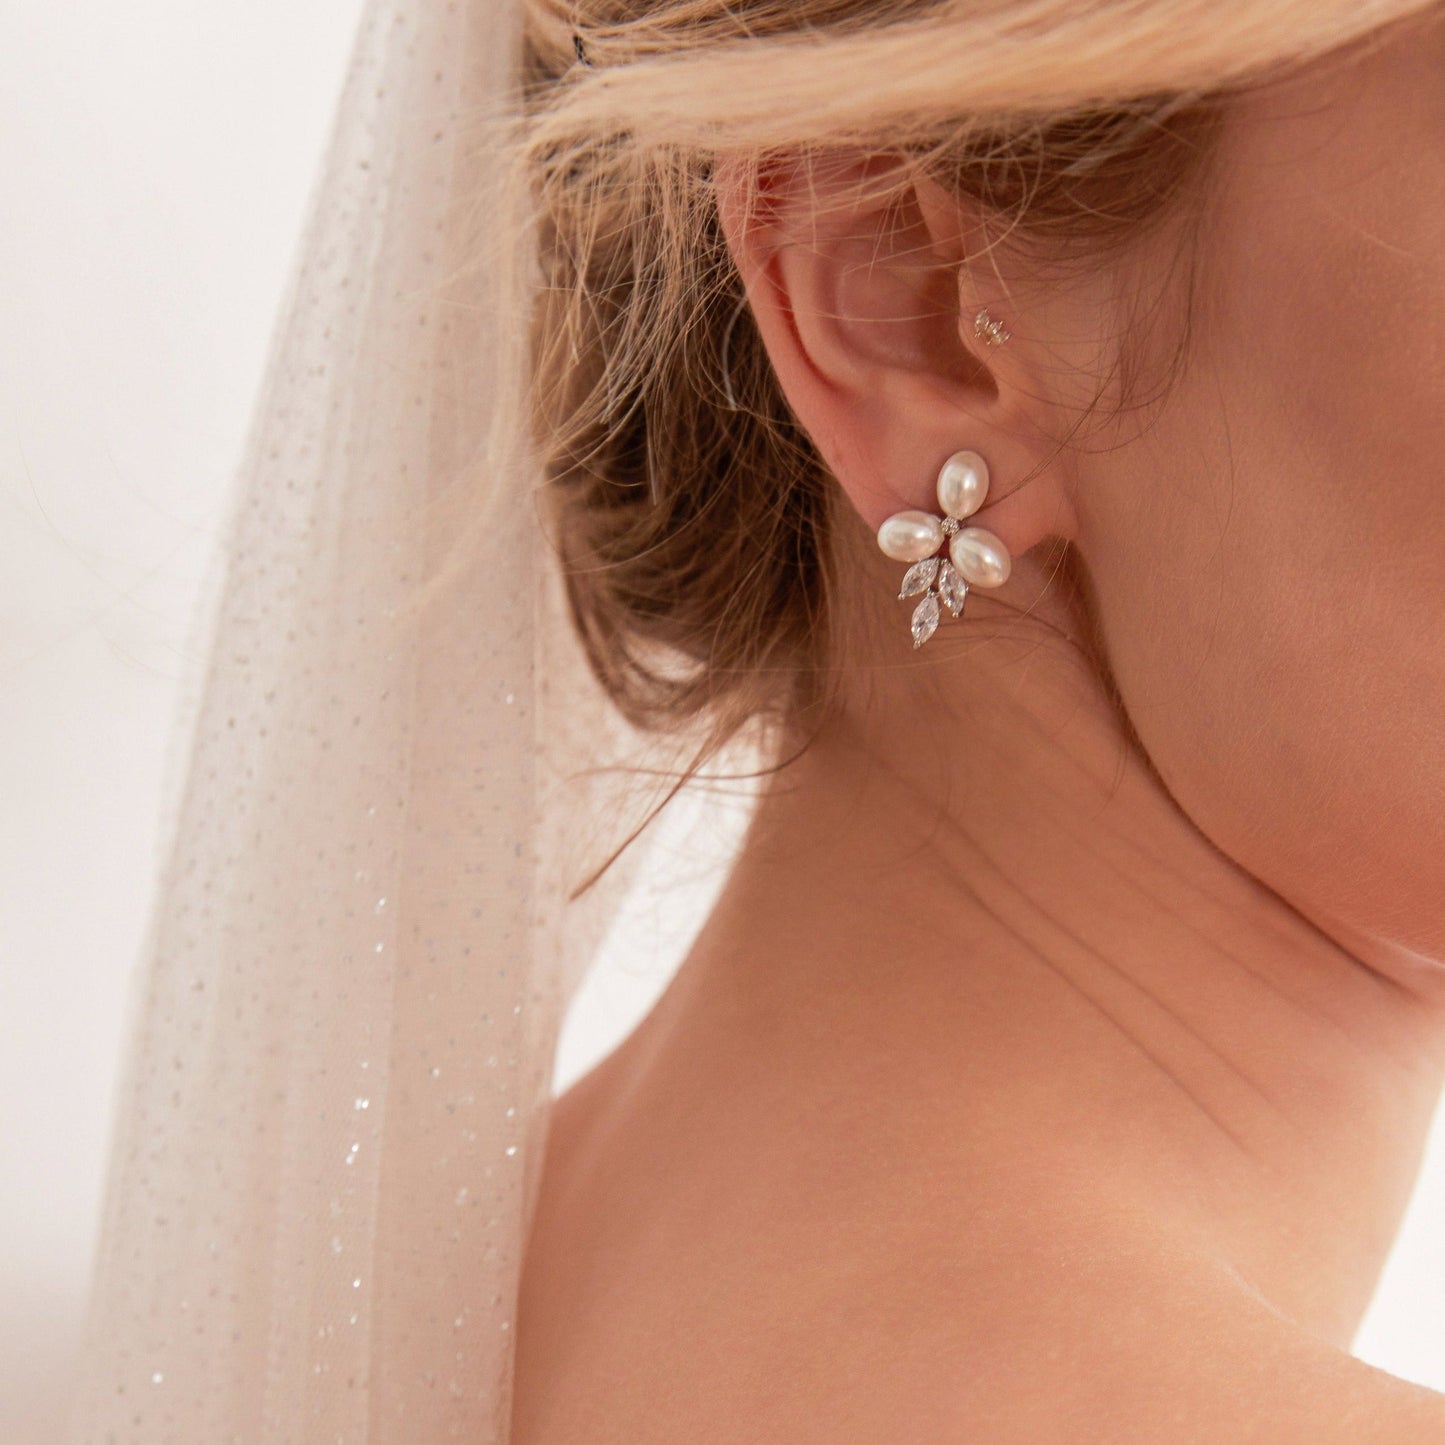 These stunning earrings feature leaf-like zirconia crystals that shimmer beneath three delicate pearls, evoking the graceful beauty of blooming flowers.